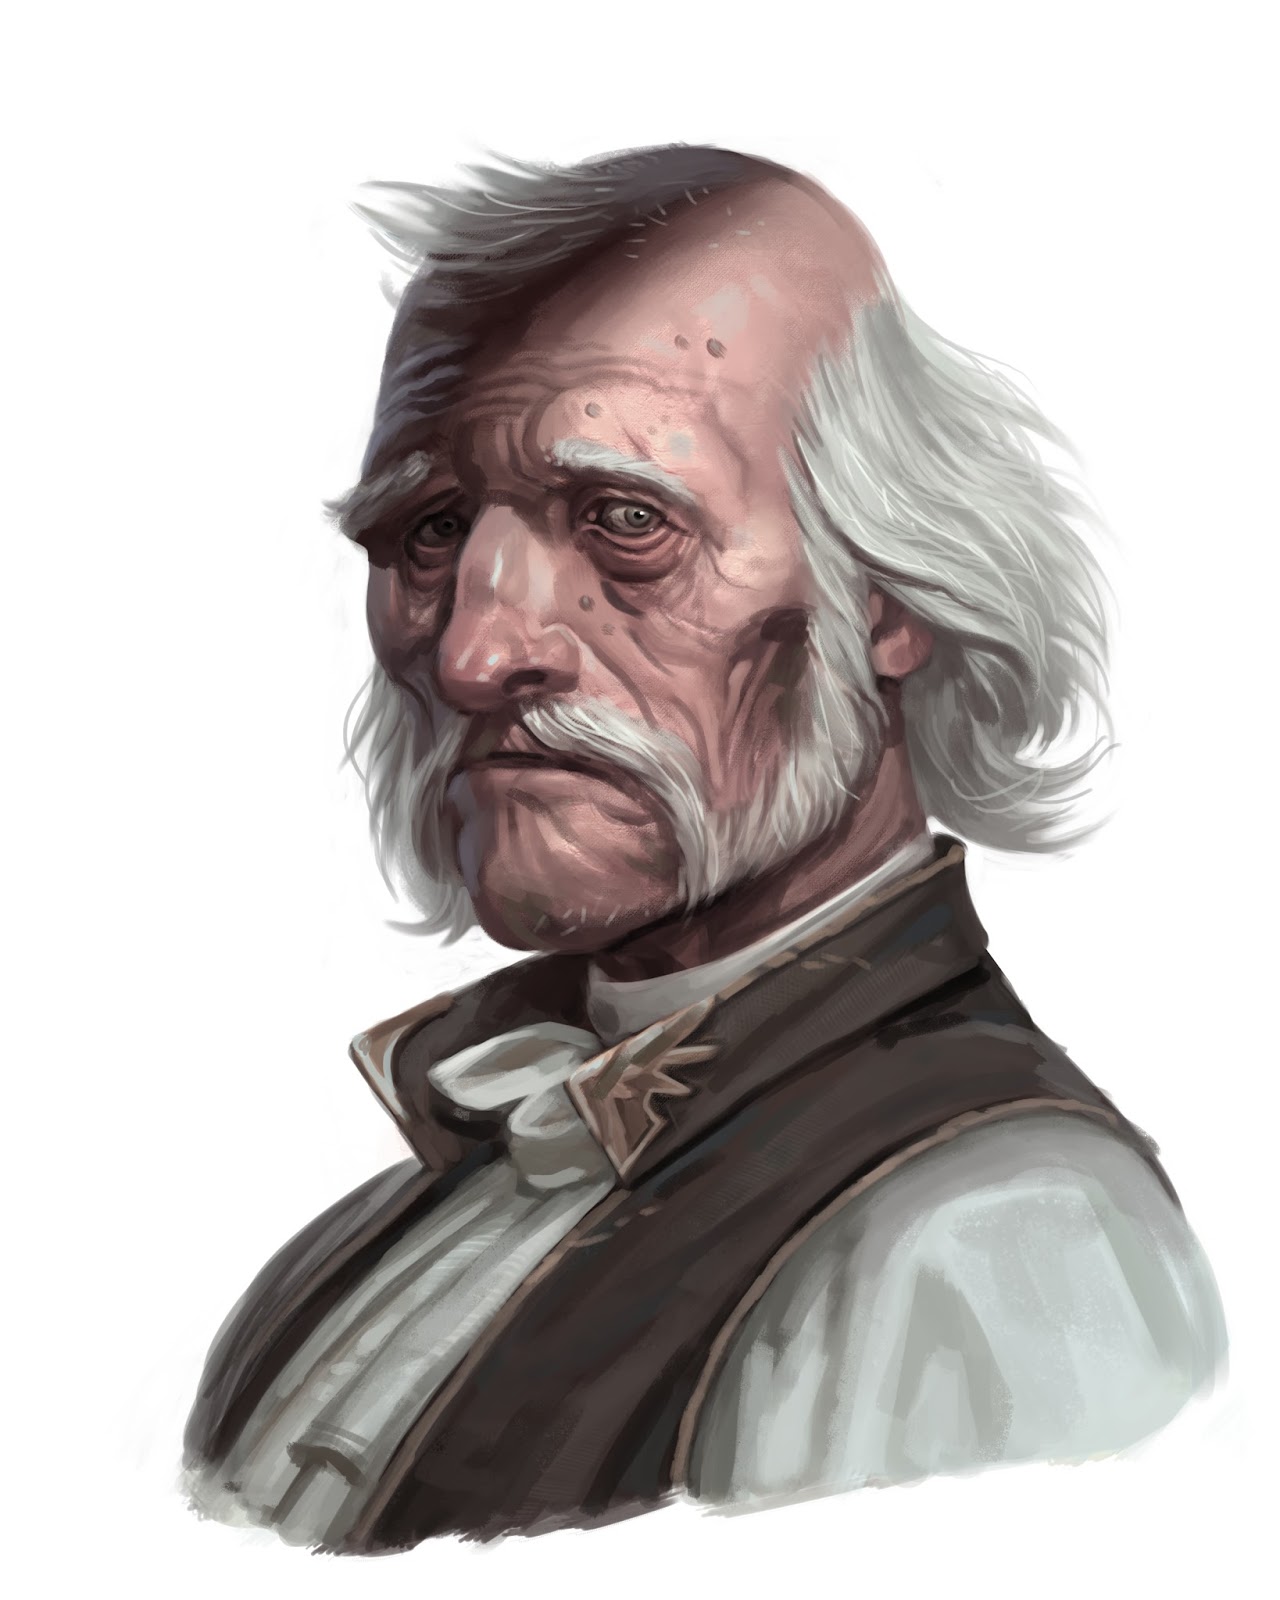 the art of Eric Belisle: Portraits for DnD